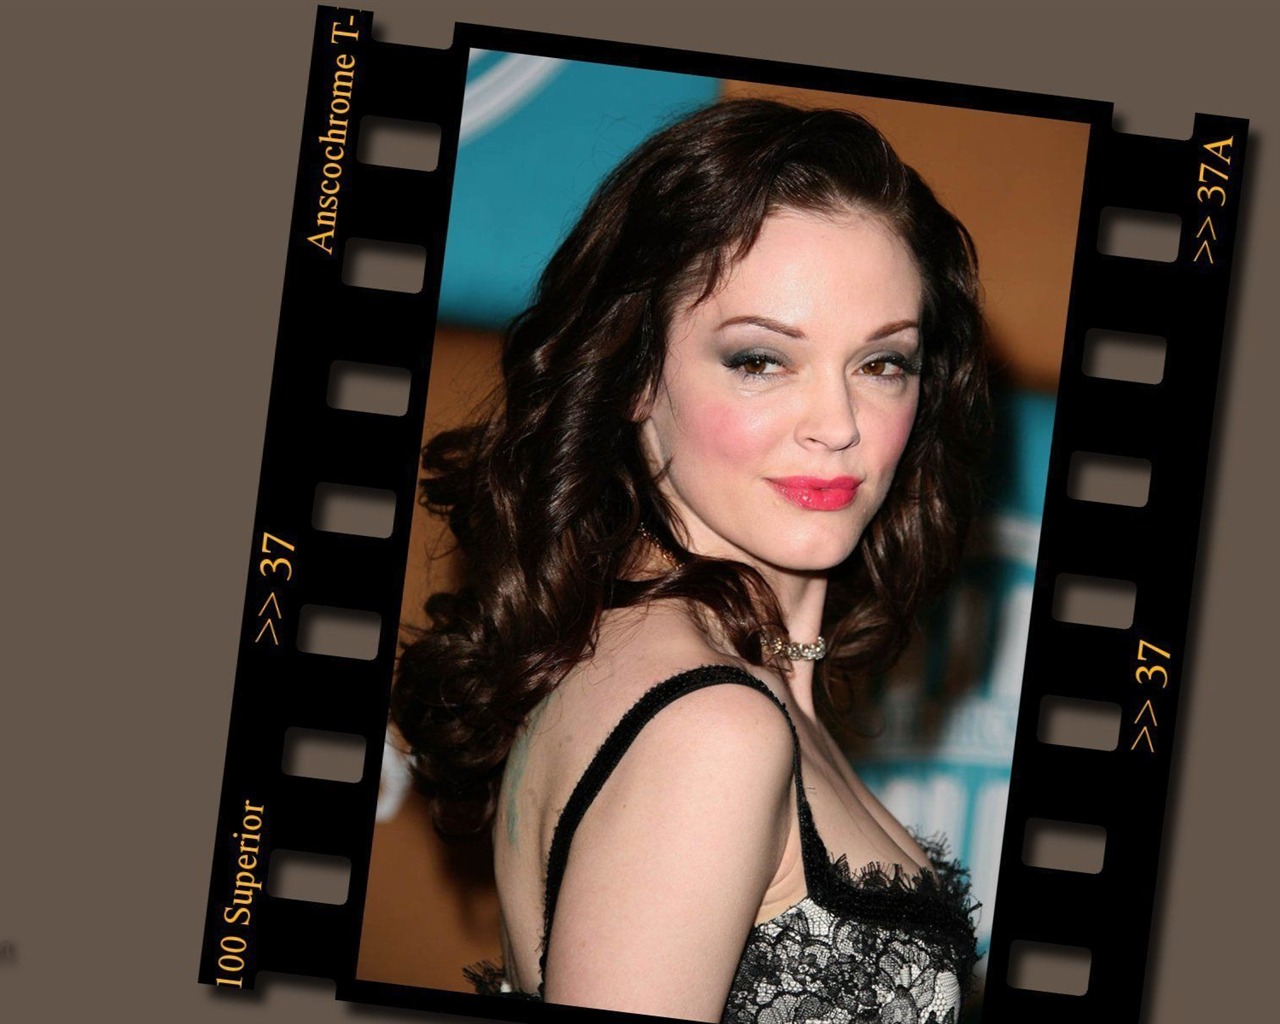 Rose McGowan #005 - 1280x1024 Wallpapers Pictures Photos Images